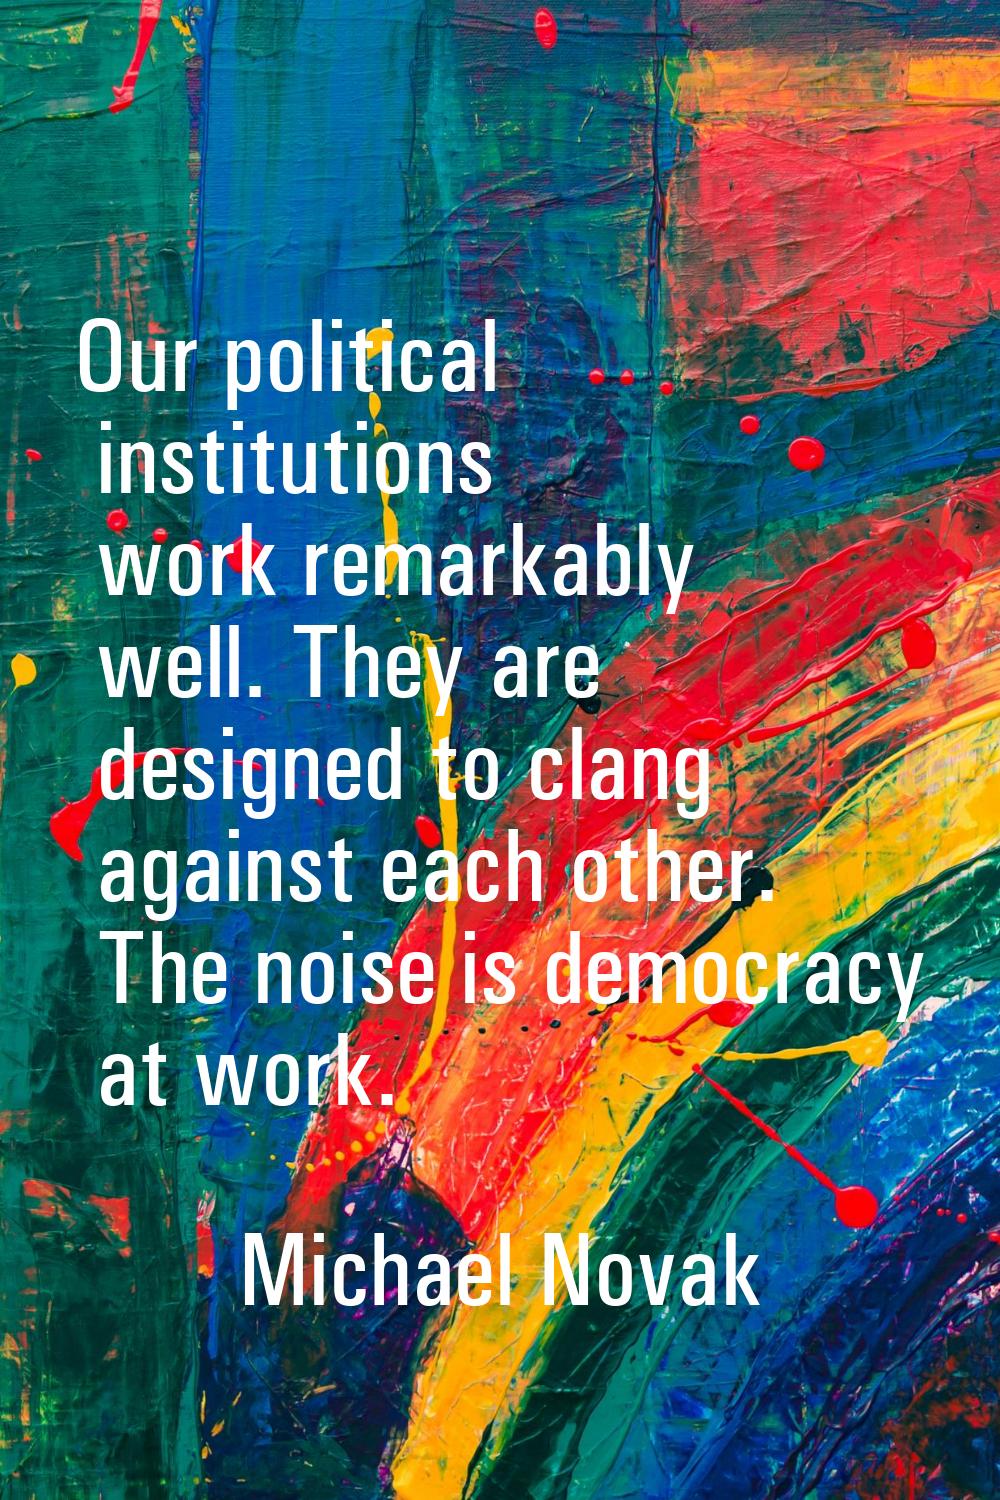 Our political institutions work remarkably well. They are designed to clang against each other. The